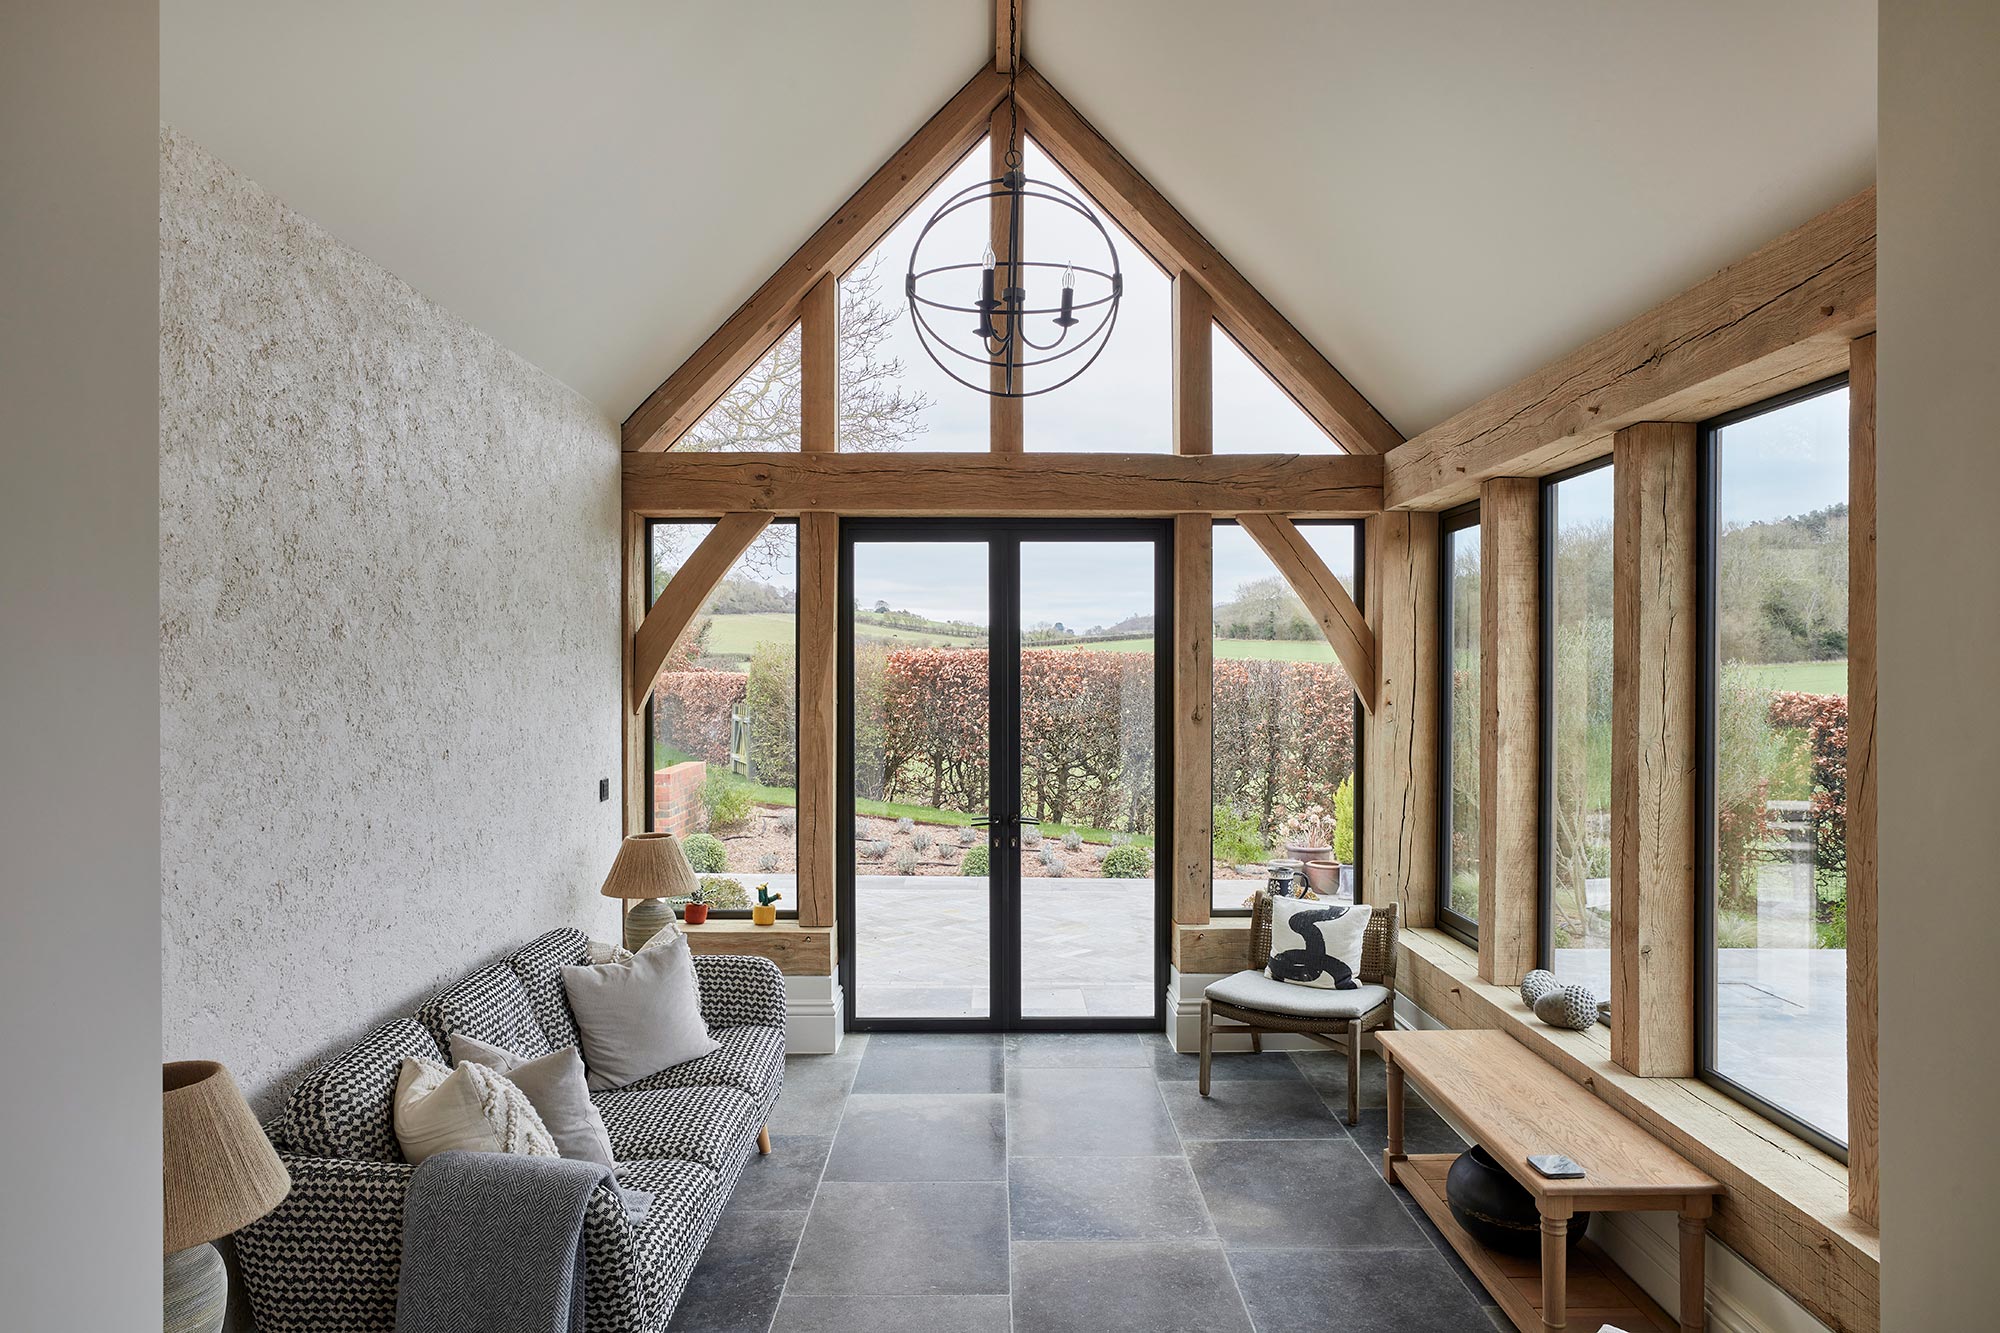 Interior view with large glazed wall - New build by KM Grant Surrey